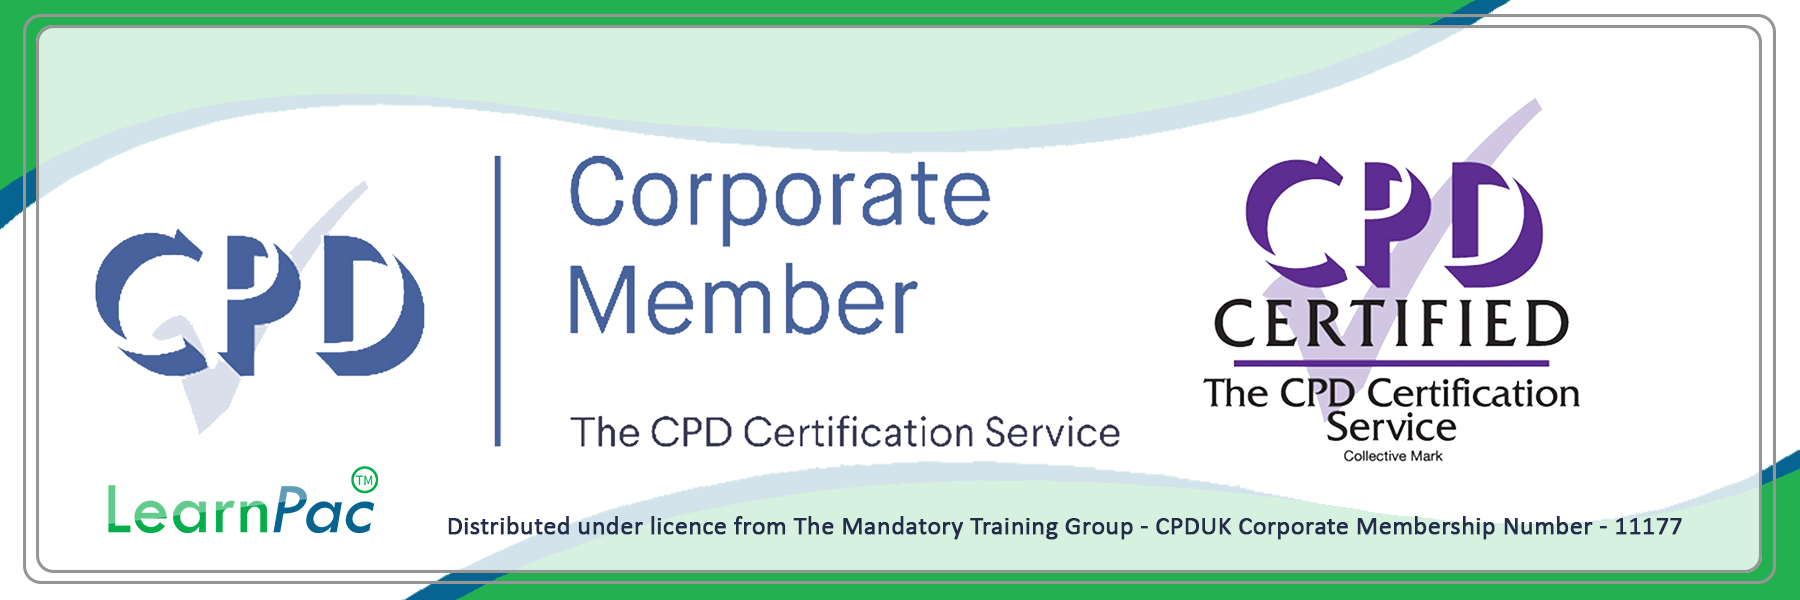 Equality, Diversity and Human Rights for Volunteers - Online Training Course - CPDUK Certified - Learnpac System UK - (2)